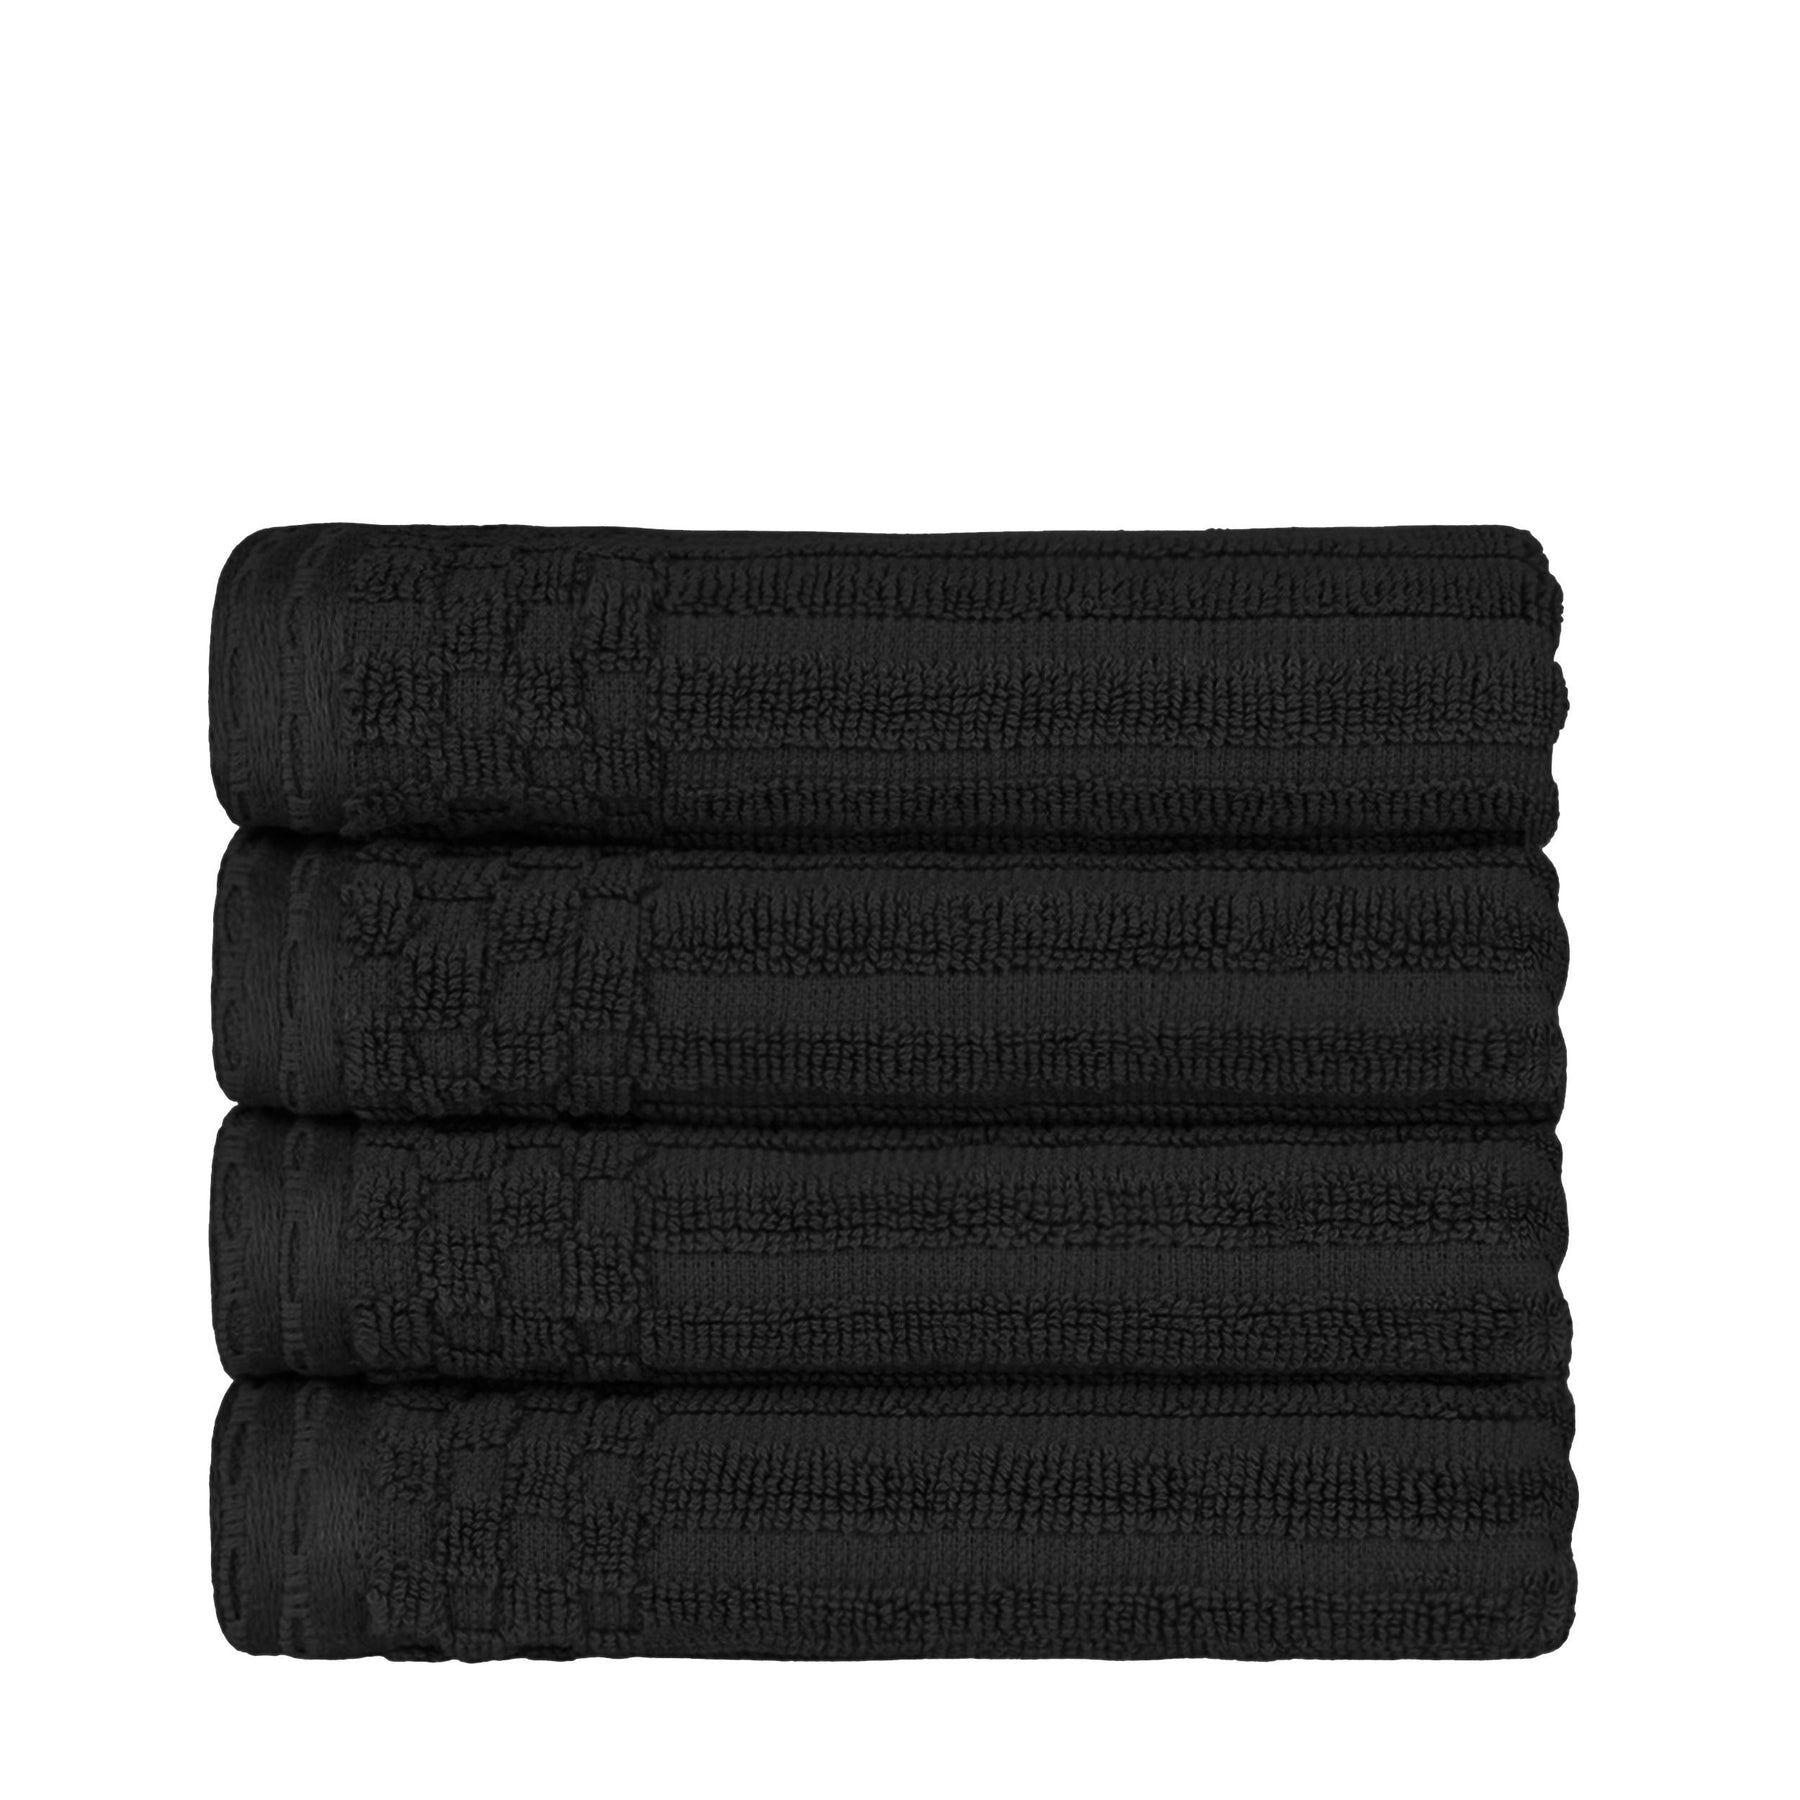 Ribbed Textured Cotton Ultra-Absorbent 4 Piece Hand Towel Set - Black